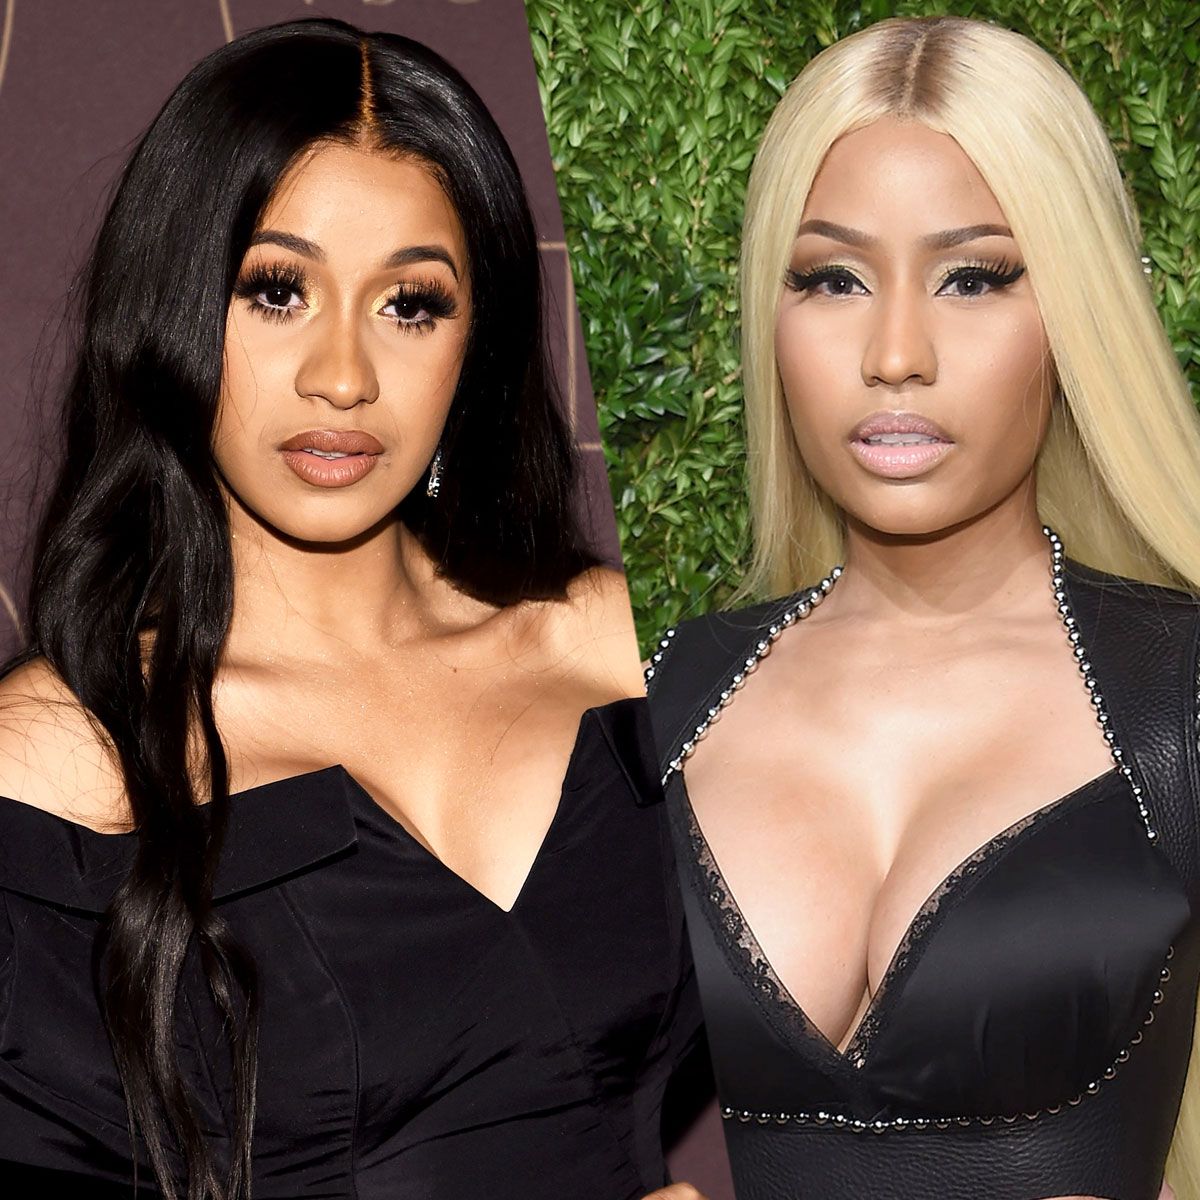 Are Cardi B And Nicki Minaj All Set To End Their Long Going Feud All At